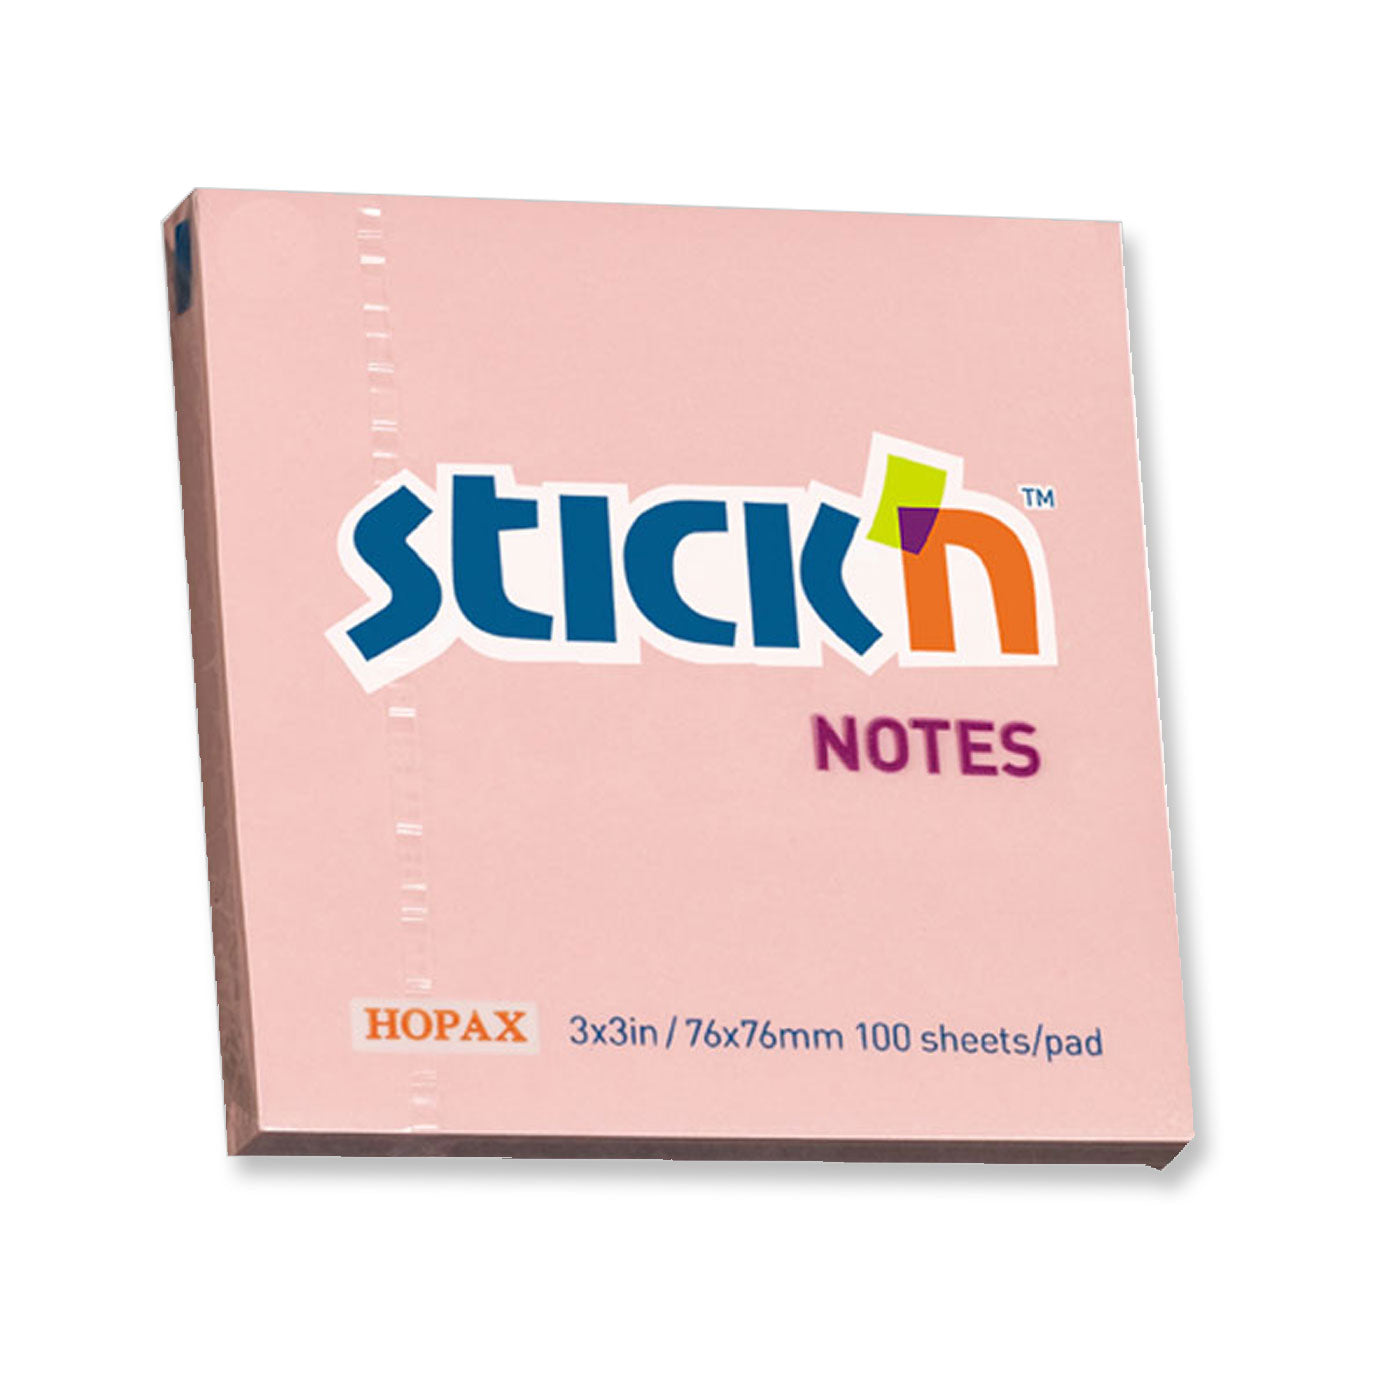 Stick'n Sticky Notes 100 Sheets 76 x 76 mm Pink